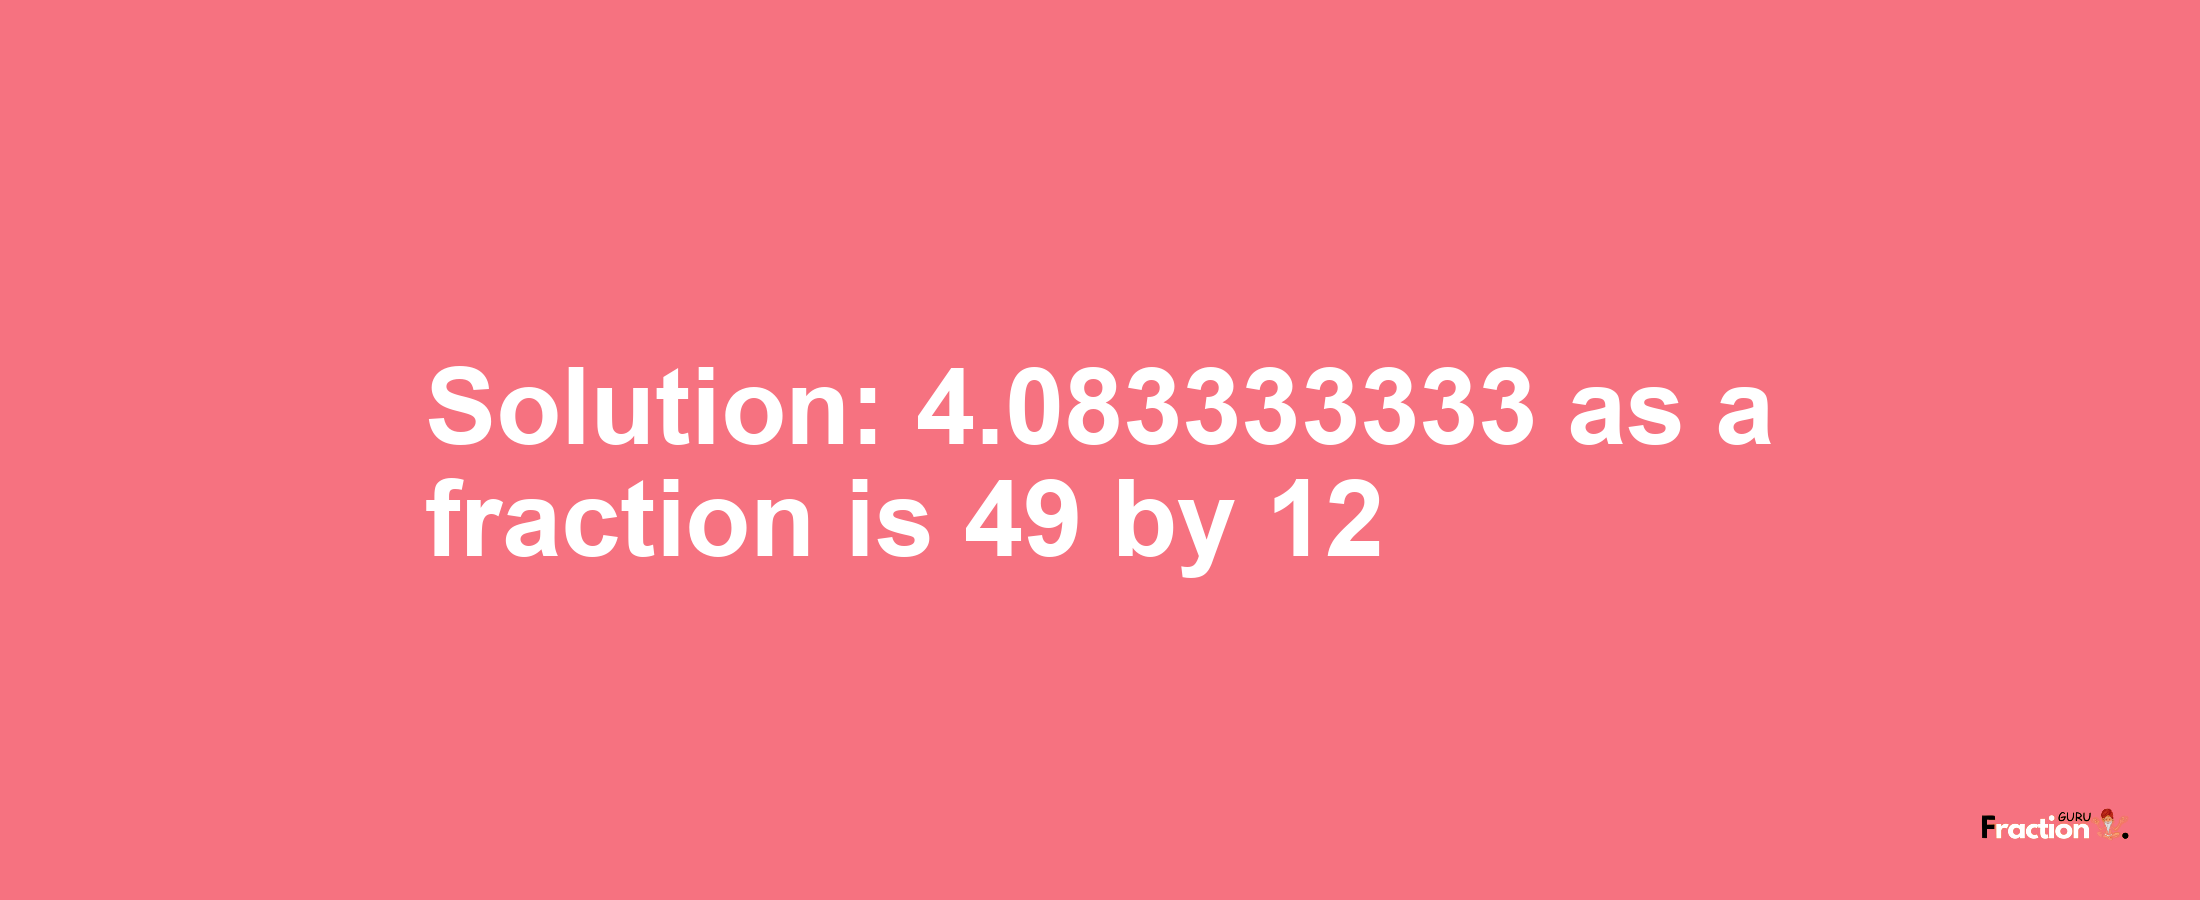 Solution:4.083333333 as a fraction is 49/12